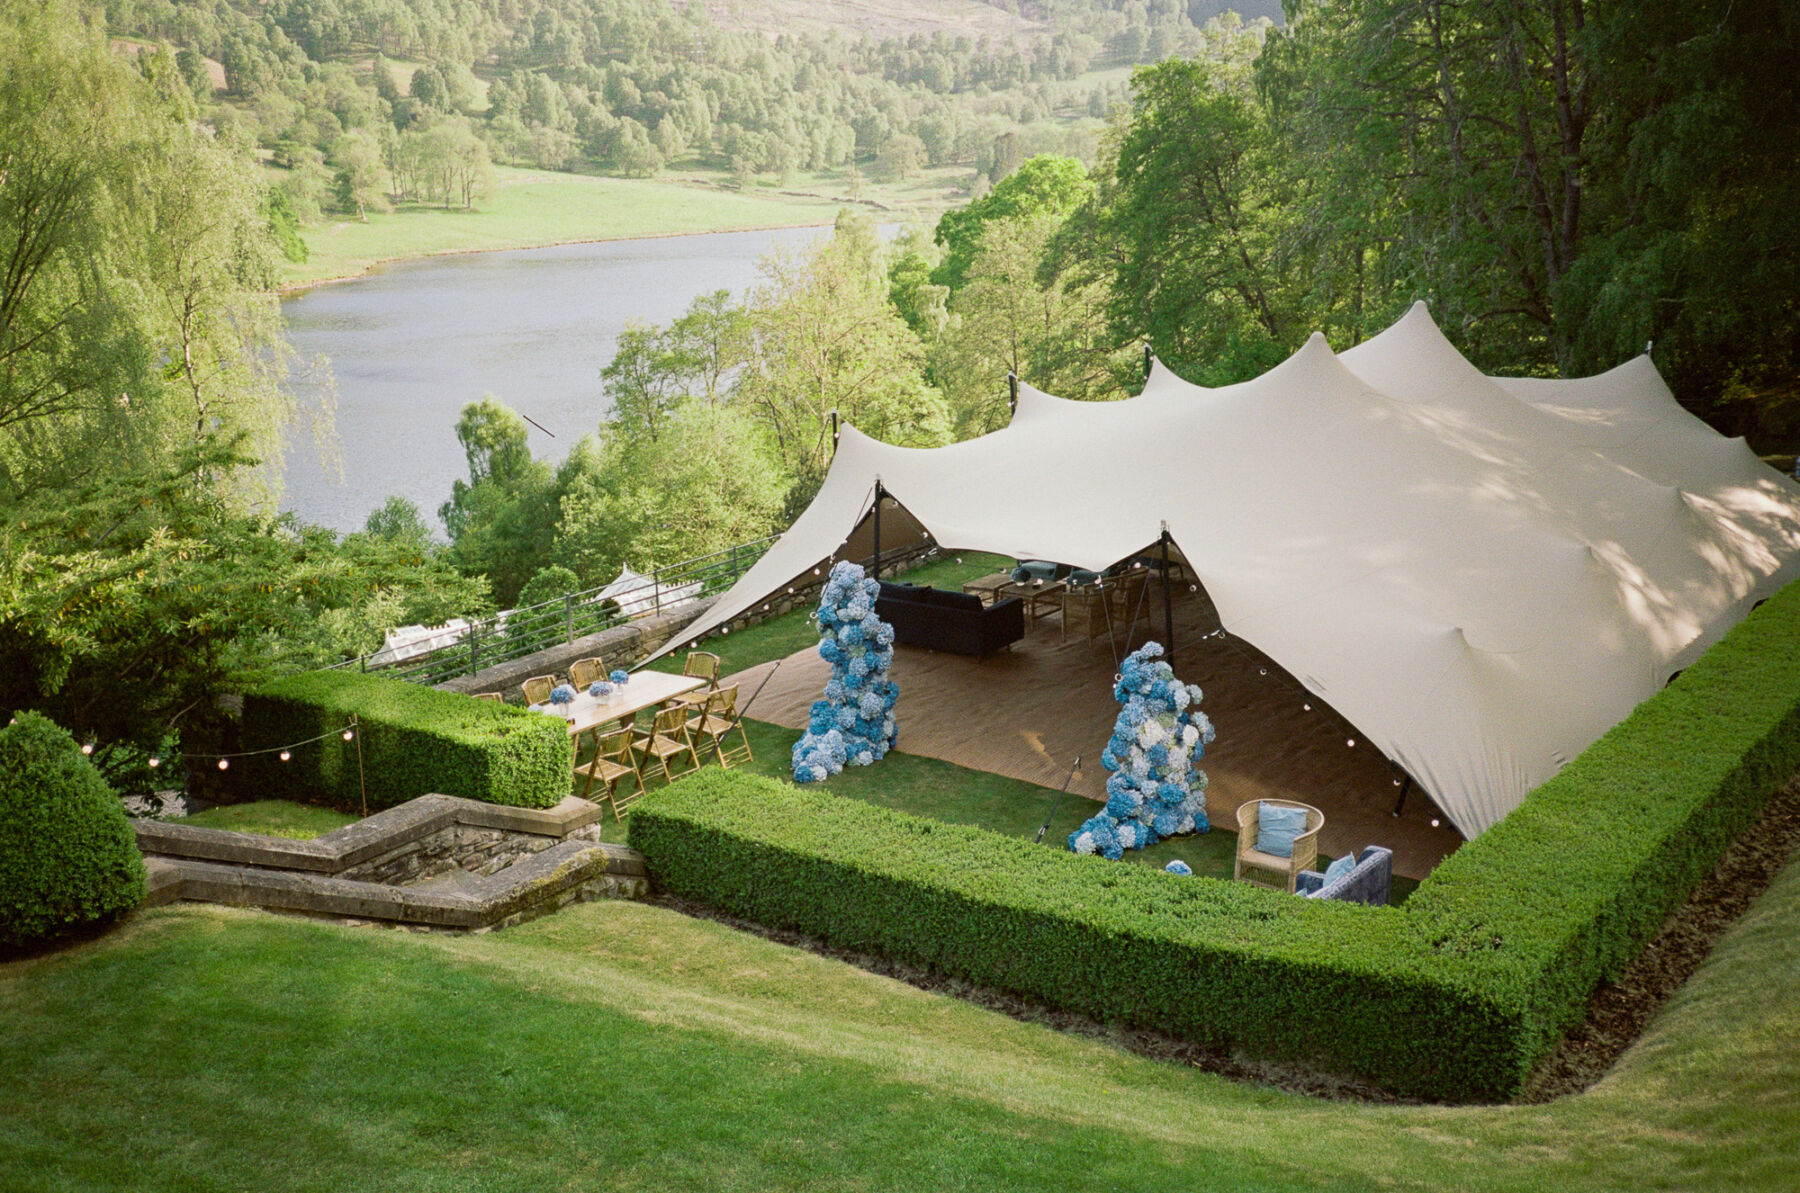 Marquee in the grounds of a Scottish castle overlooking a river. The marquee entrance is decorated with towers of blue and white hydrangea by Joseph Massie.